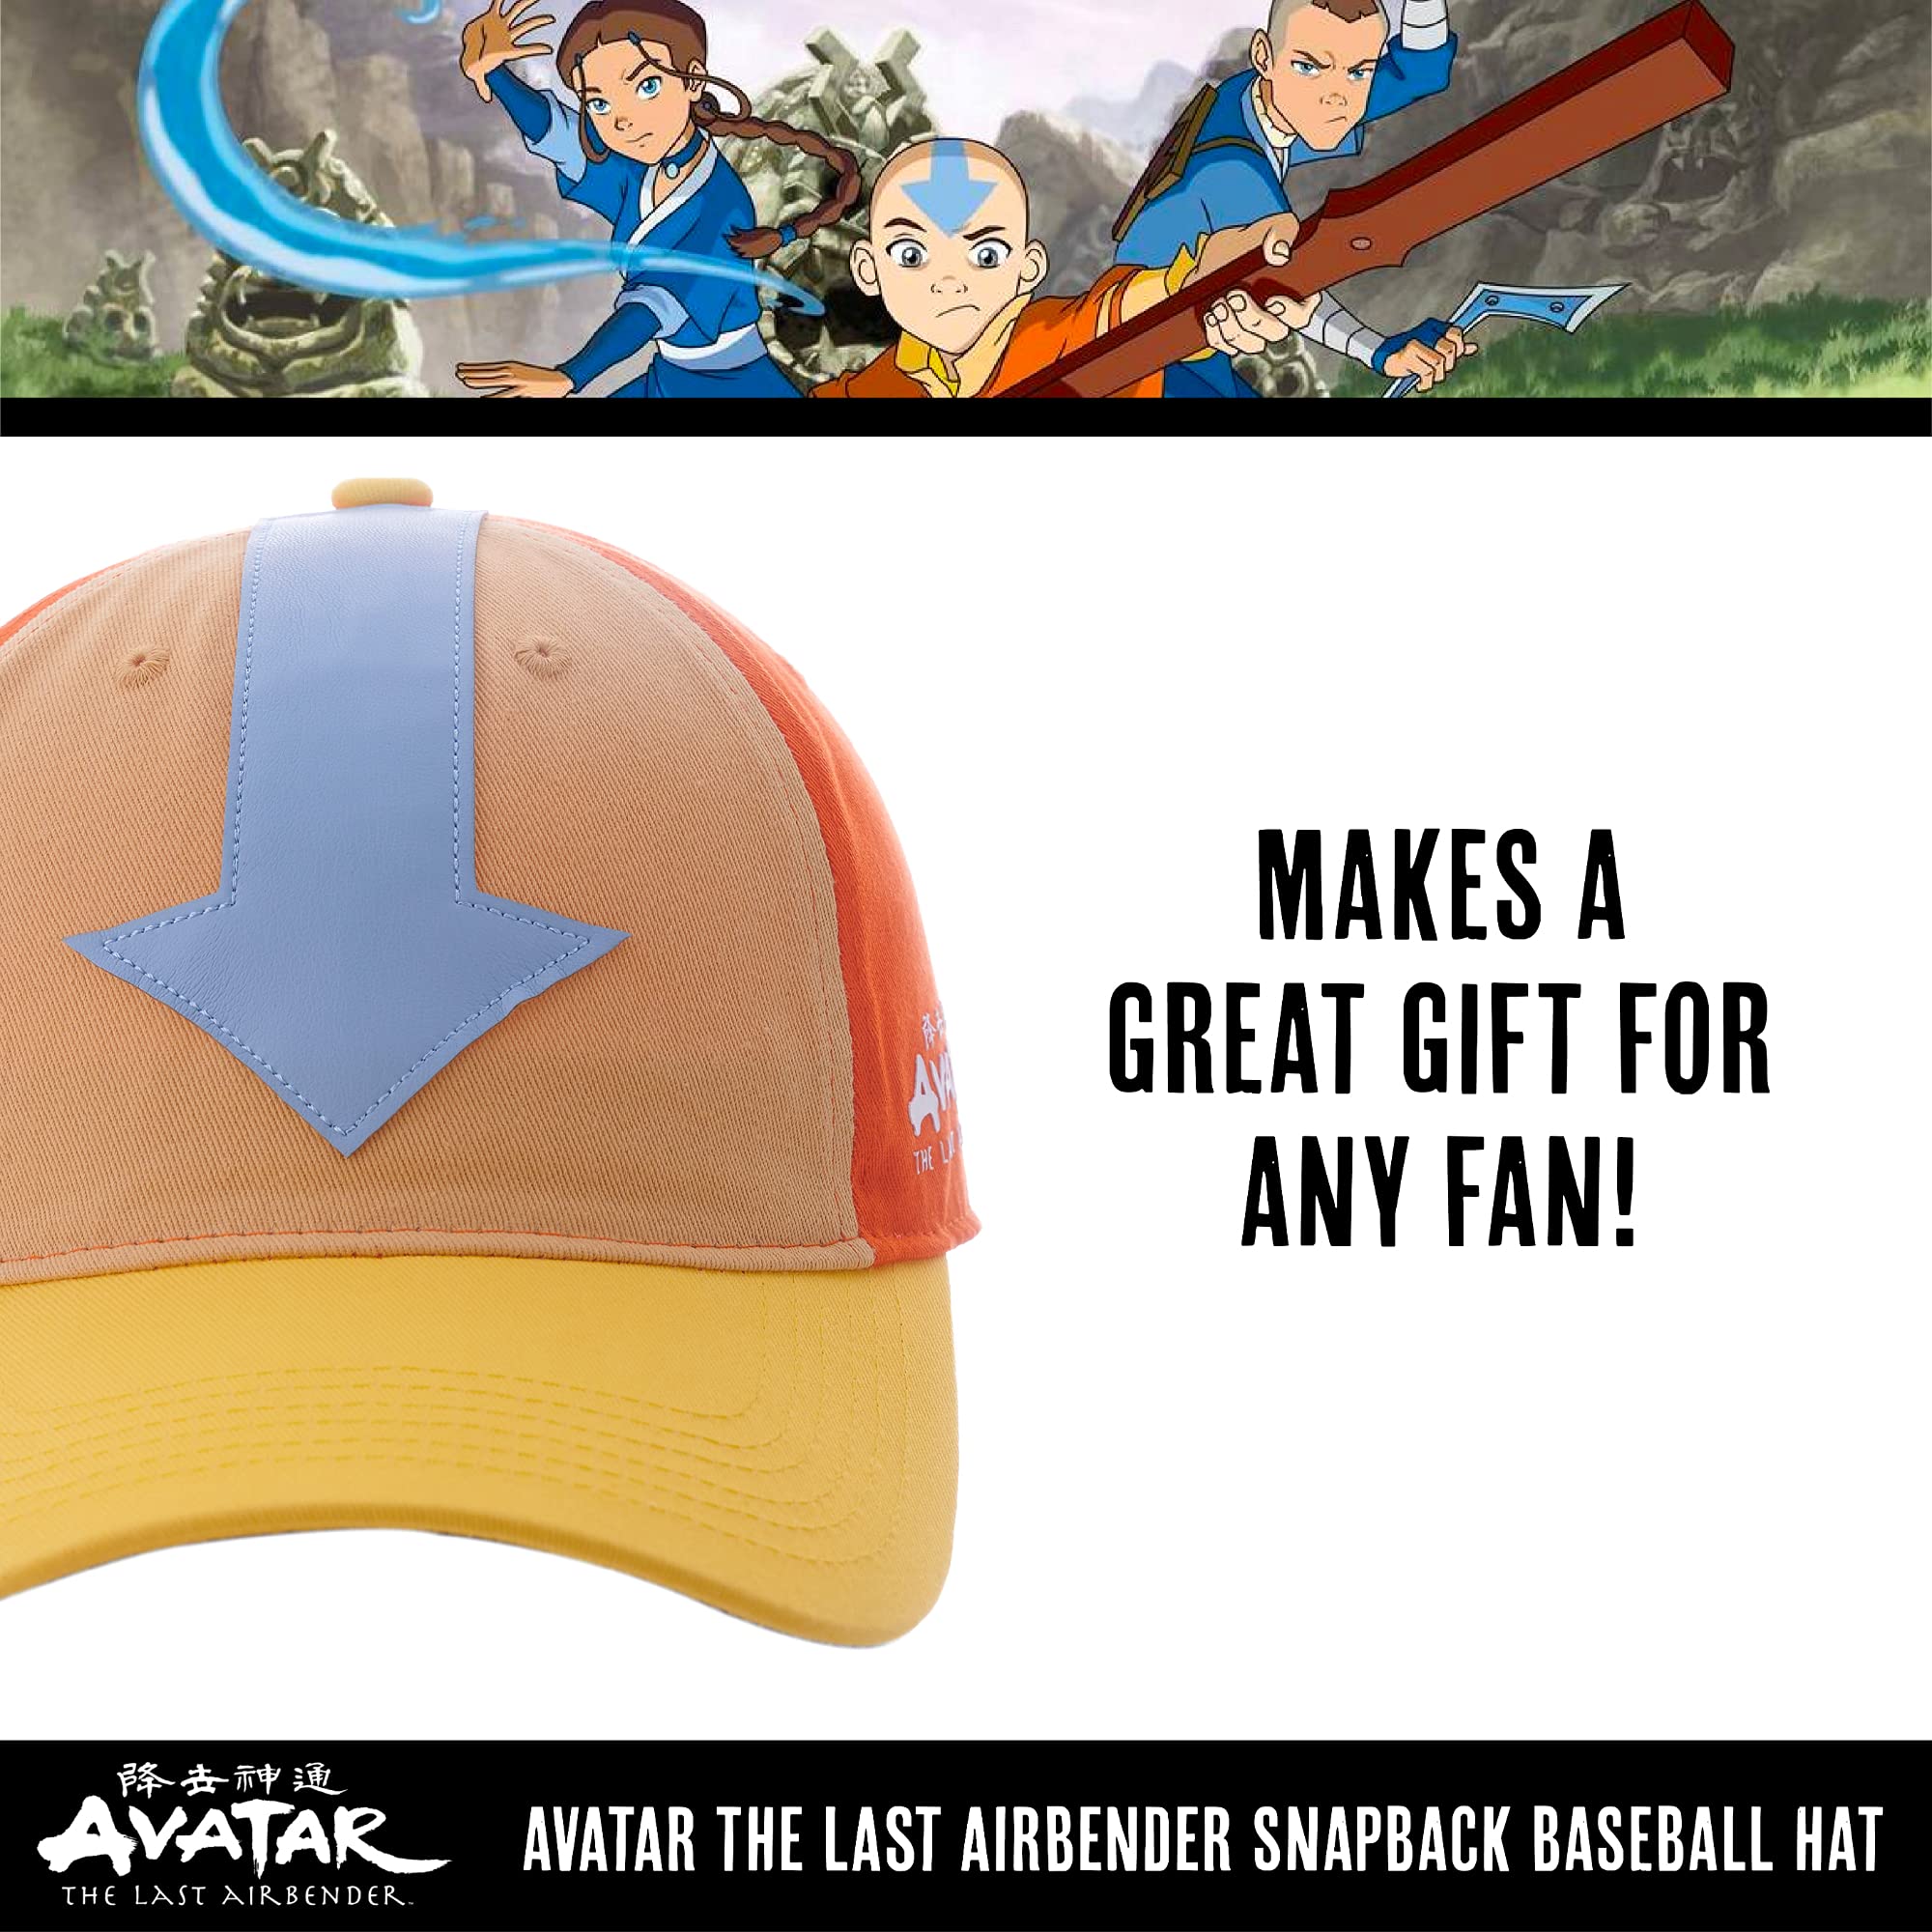 Avatar The Last Airbender Arrow Mark Cotton Adjustable Snapback Baseball Hat with Curved Brim, Multi, One Size